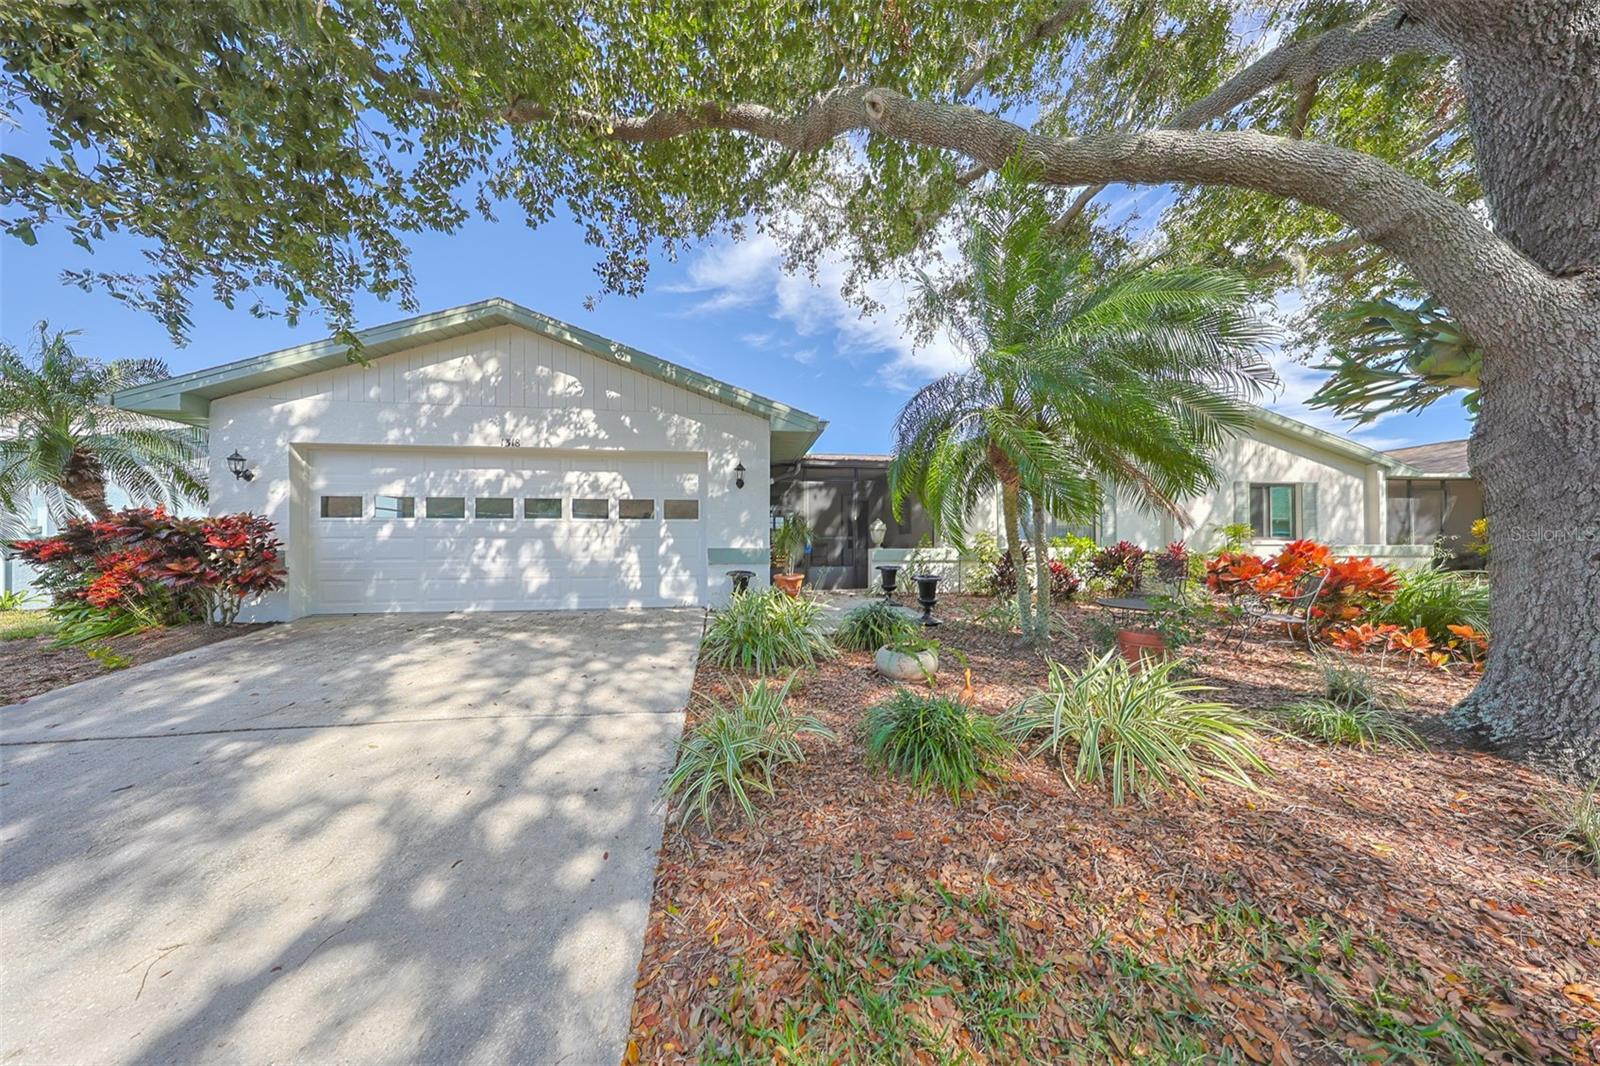 Beautifully landscaped, freshly painted exterior and a large, shaded lot with swaying Palm Trees and a large 35-year-old majestic Oak tree make for a perfect front entrance to your new home. This home is TURNKEY!